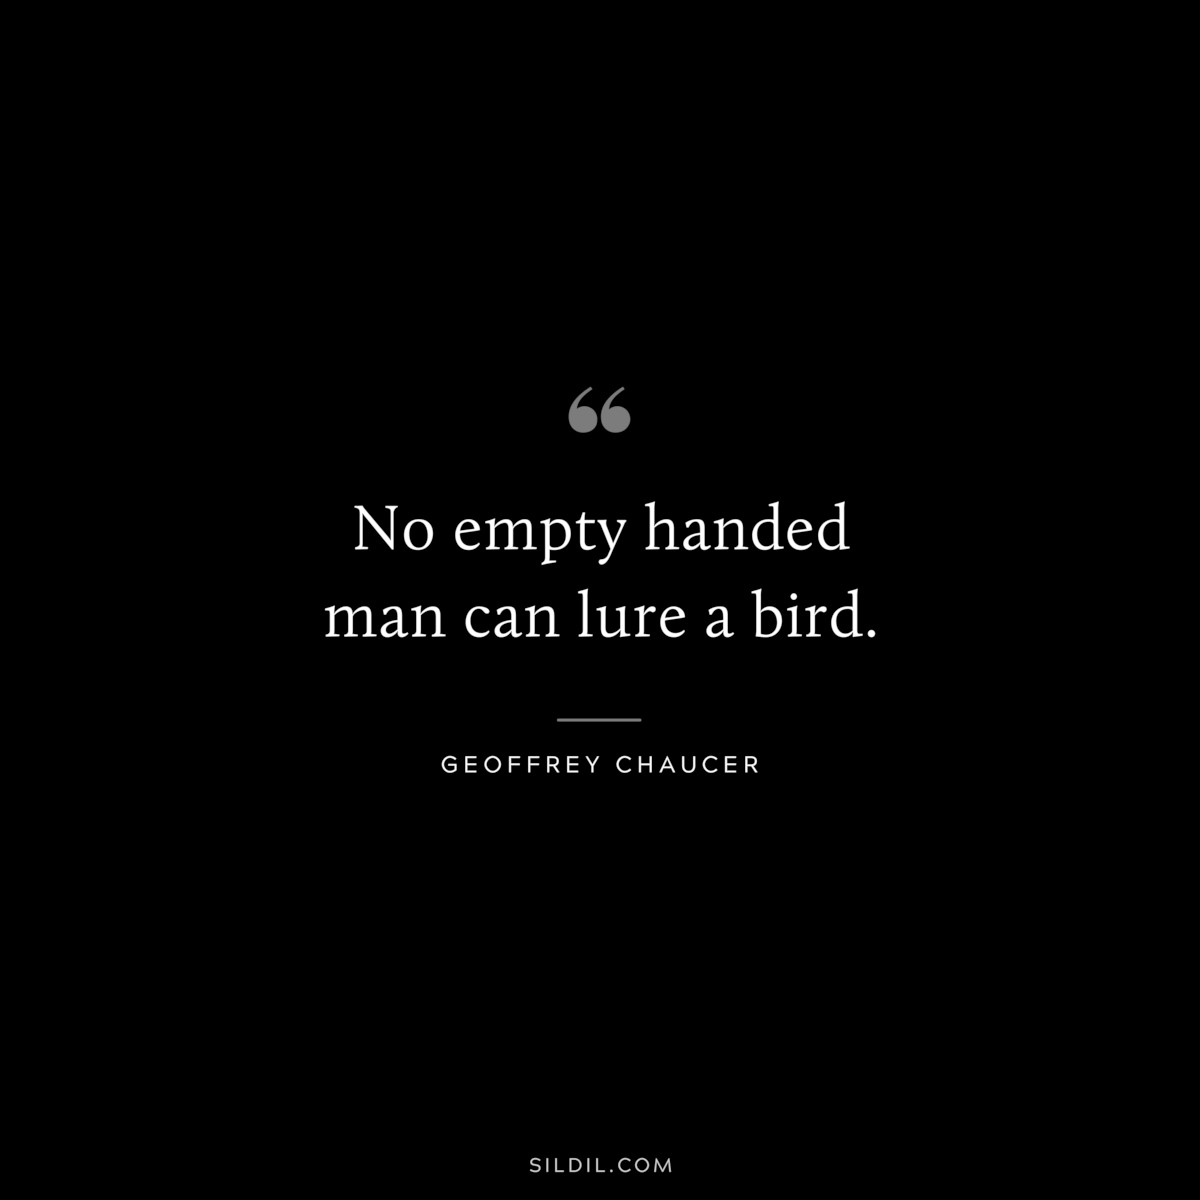 No empty handed man can lure a bird. ― Geoffrey Chaucer